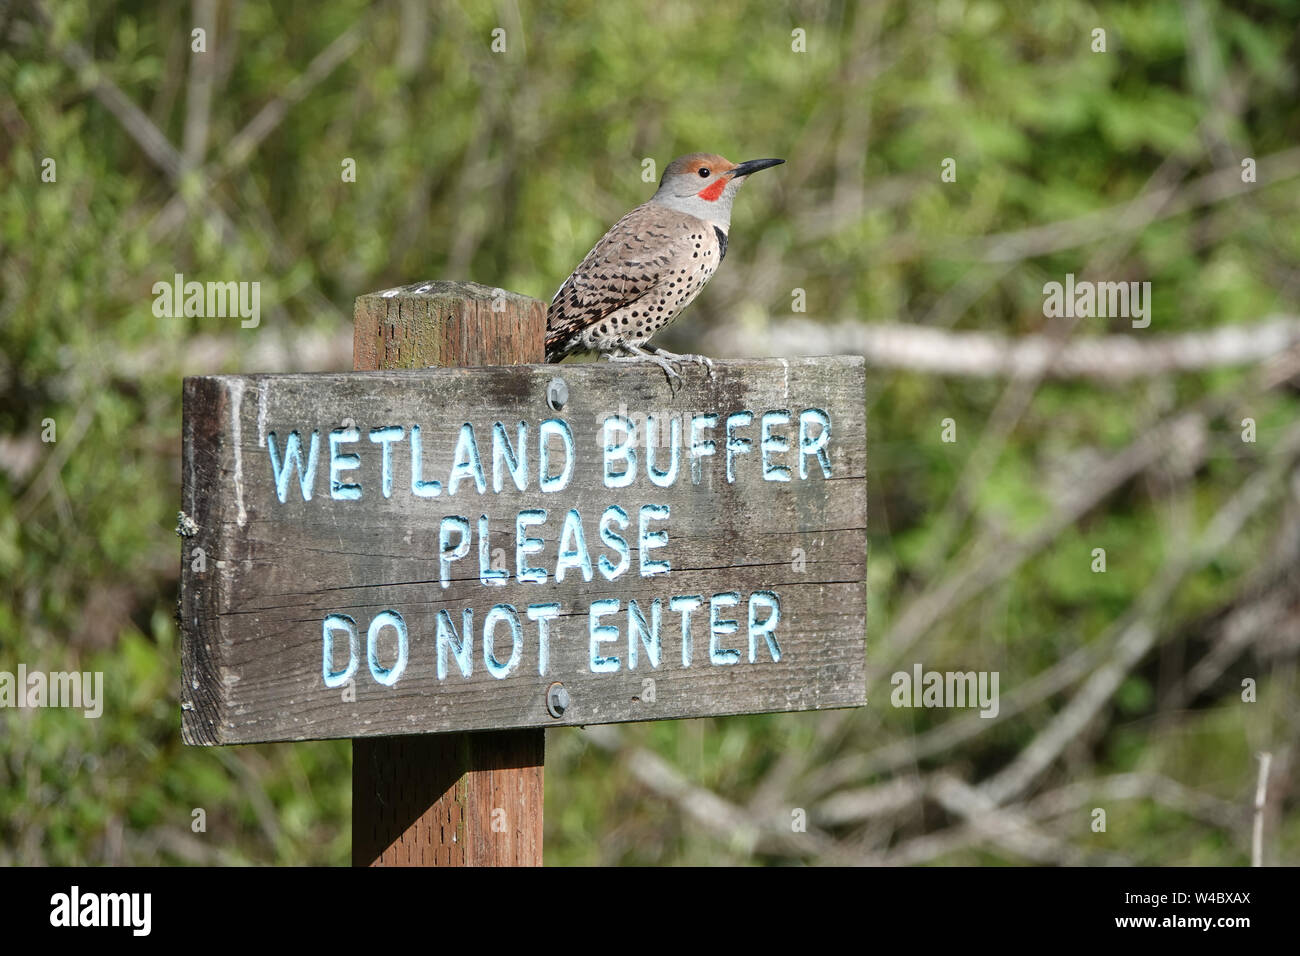 Male northern flicker or common flicker (Colaptes auratus) sitting on "Wetland bbuffer, please do not enter" sign Stock Photo